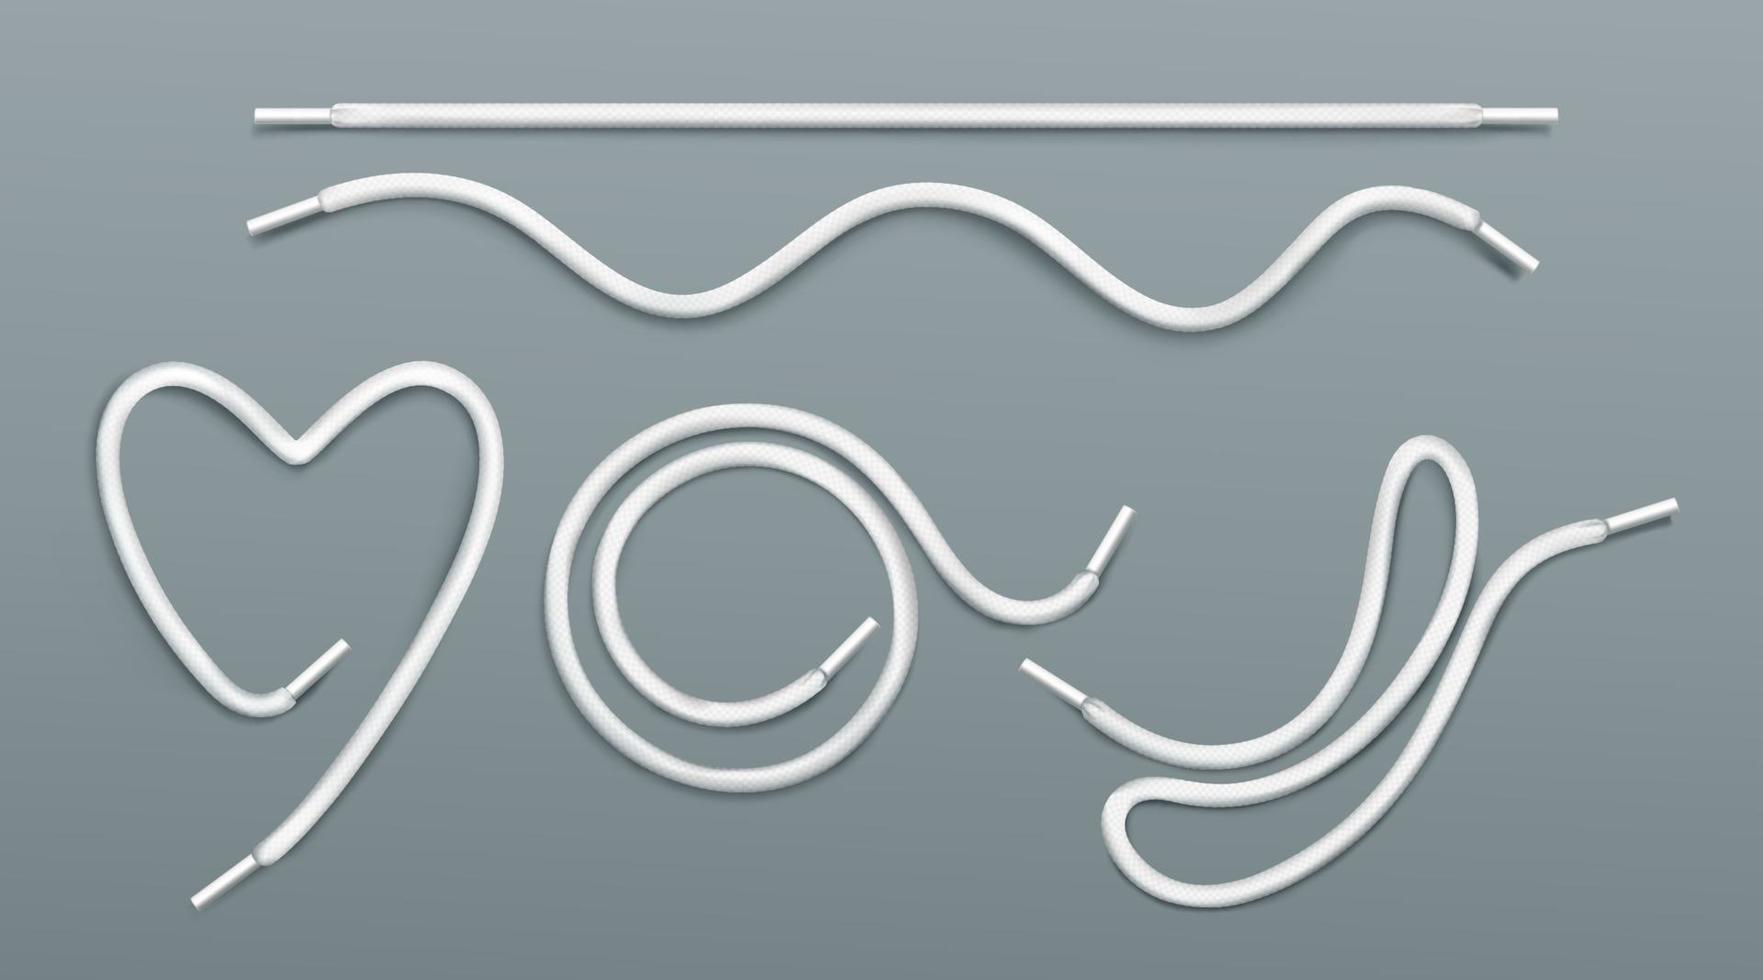 Shoe laces of heart, string, round and wavy shapes vector